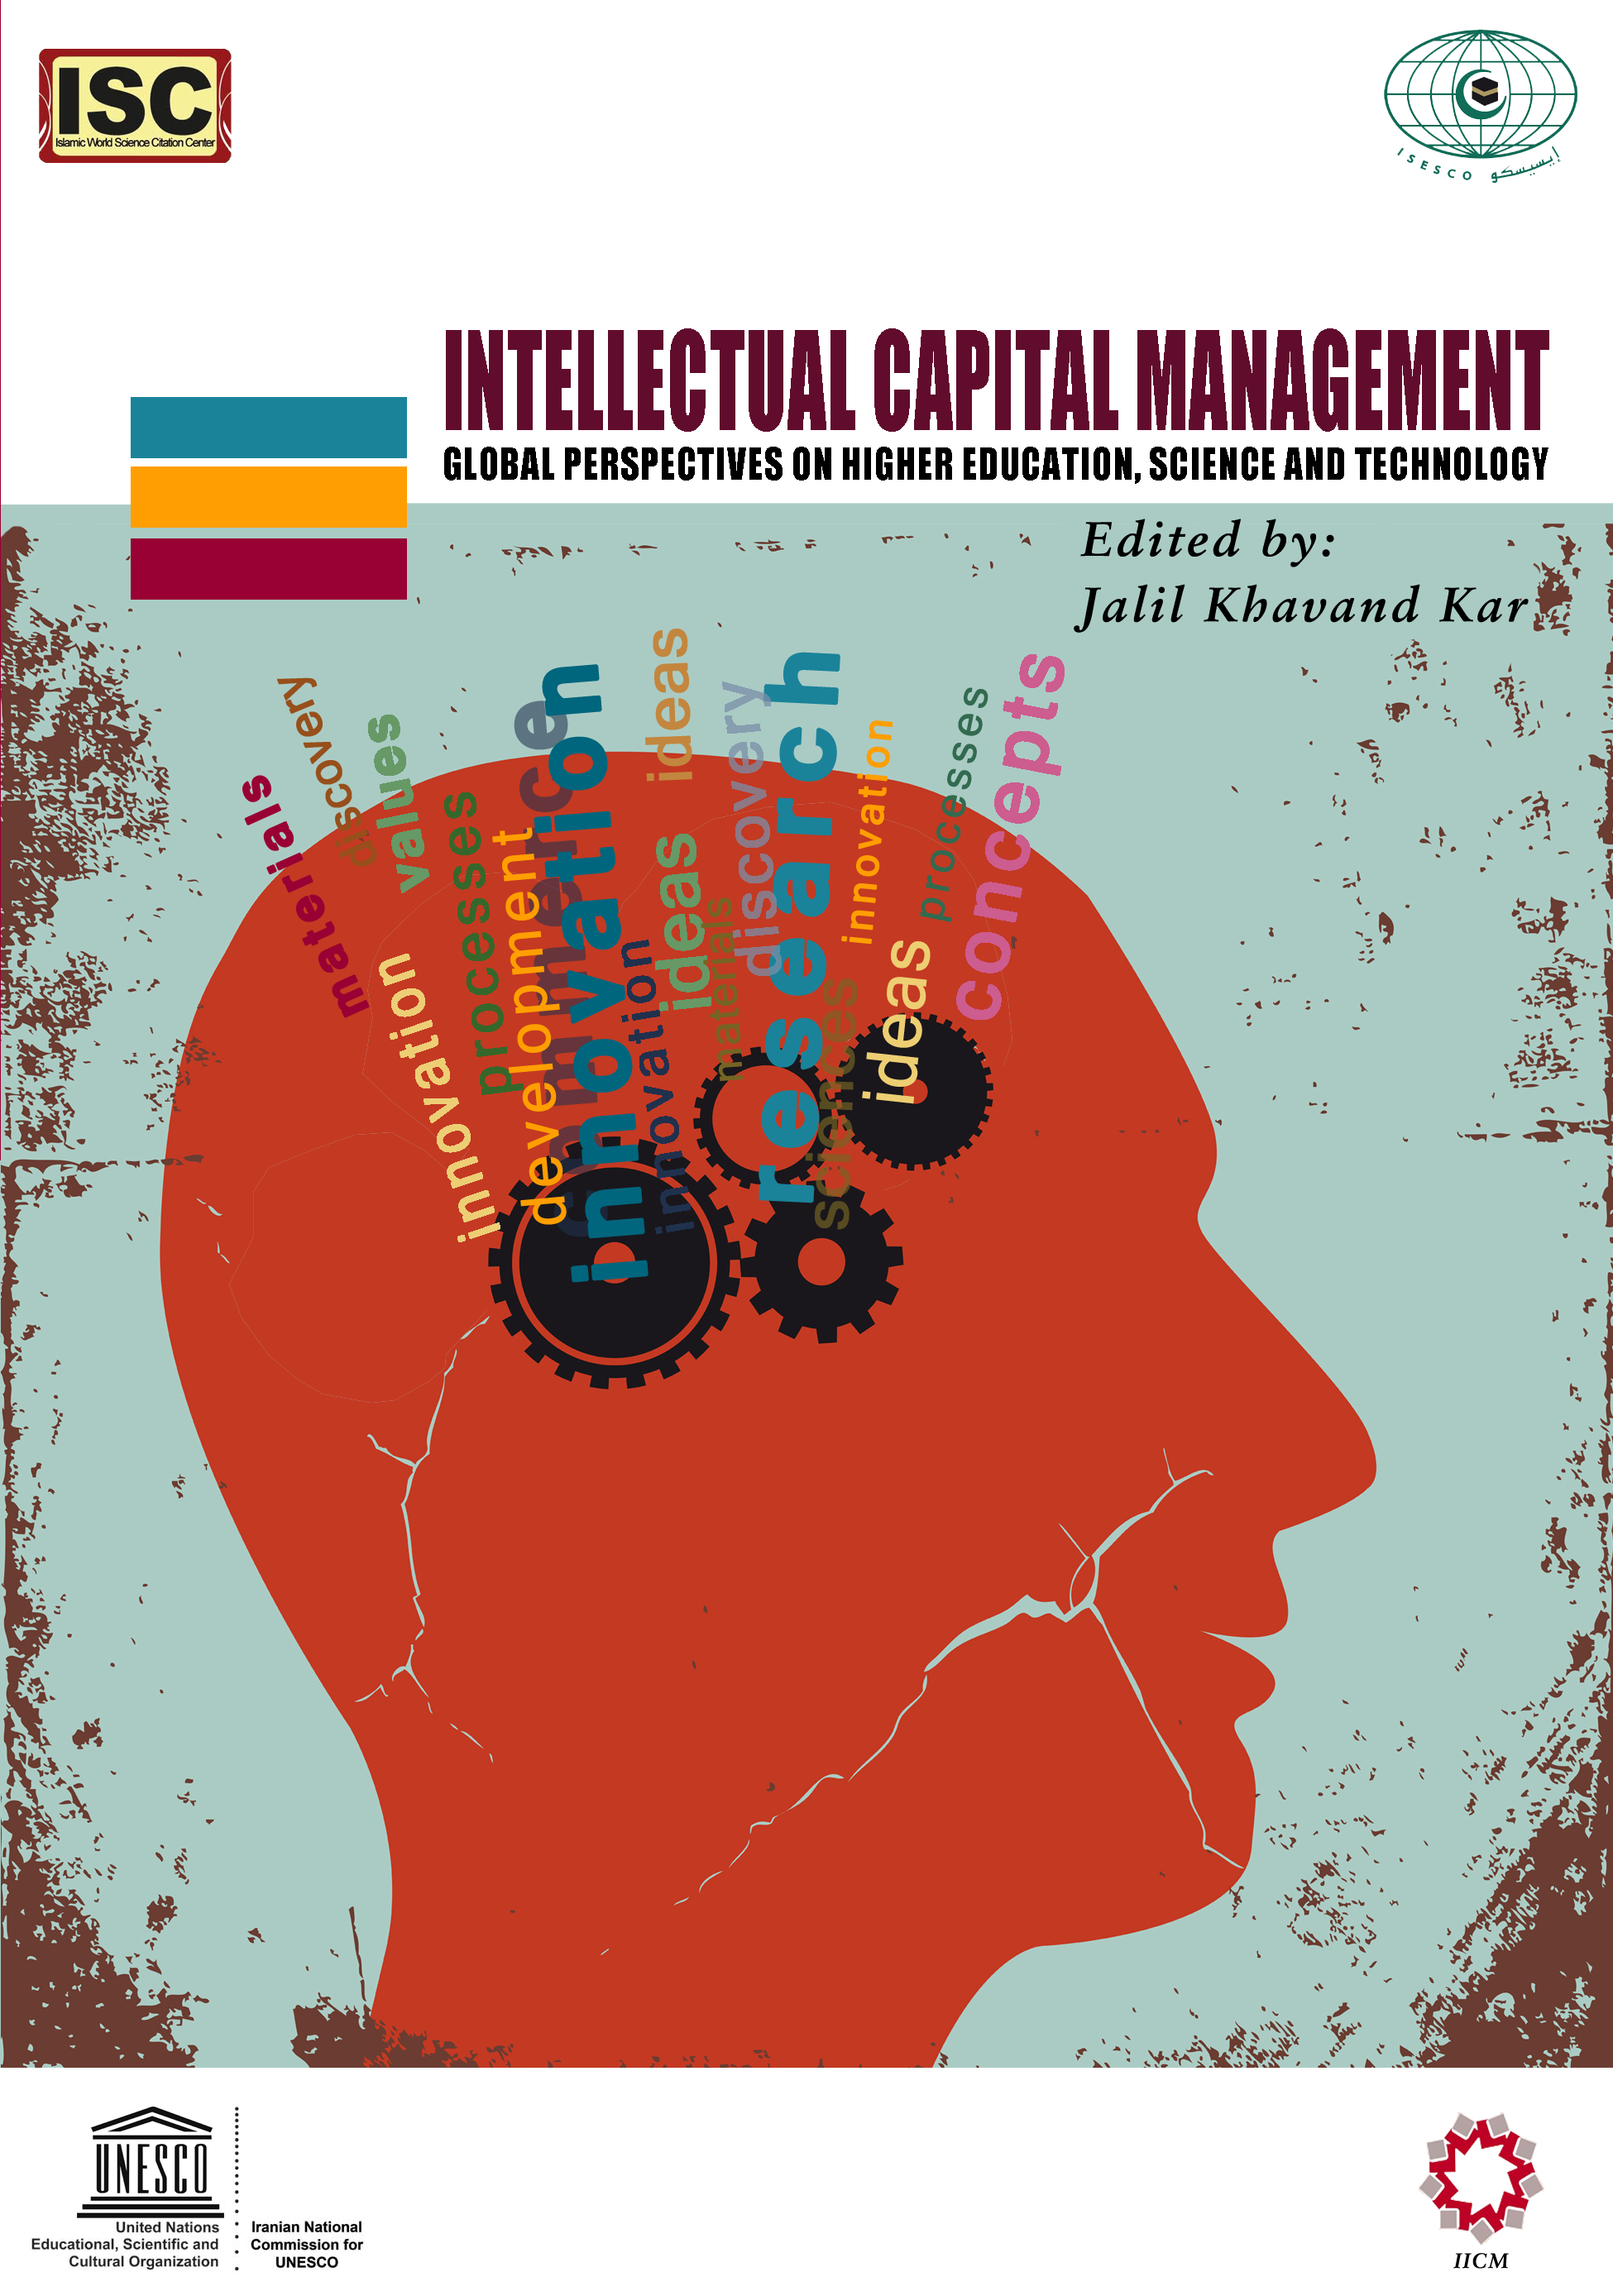 Intellectual Capital Management: Global Perspectives on Higher Education, Science and Technology